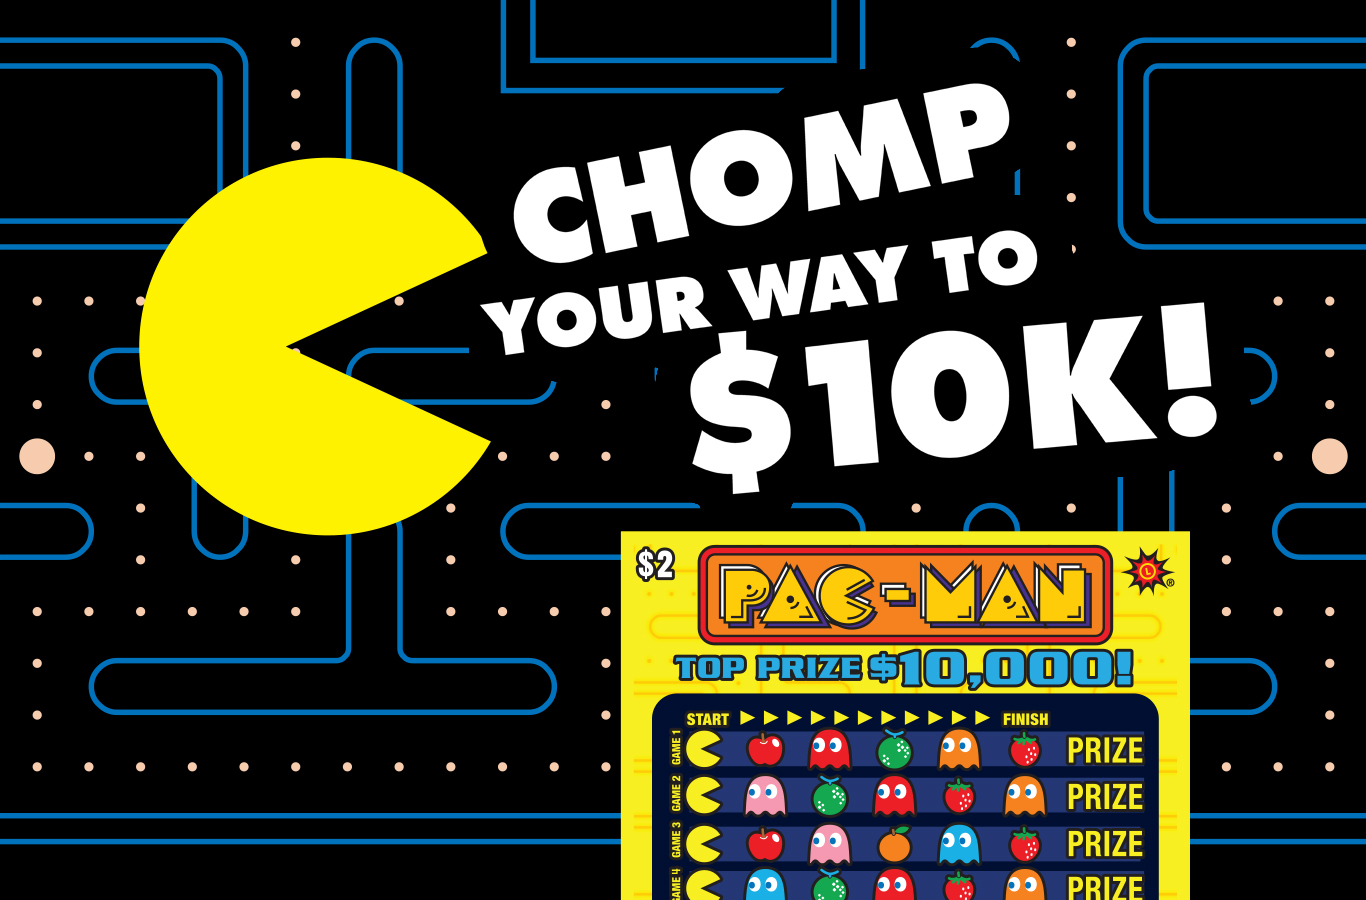 The all-time favorite video game is now an all-time fun scratch-off. You could win up to $10,000 or enter to win a PAC-MAN home arcade machine!